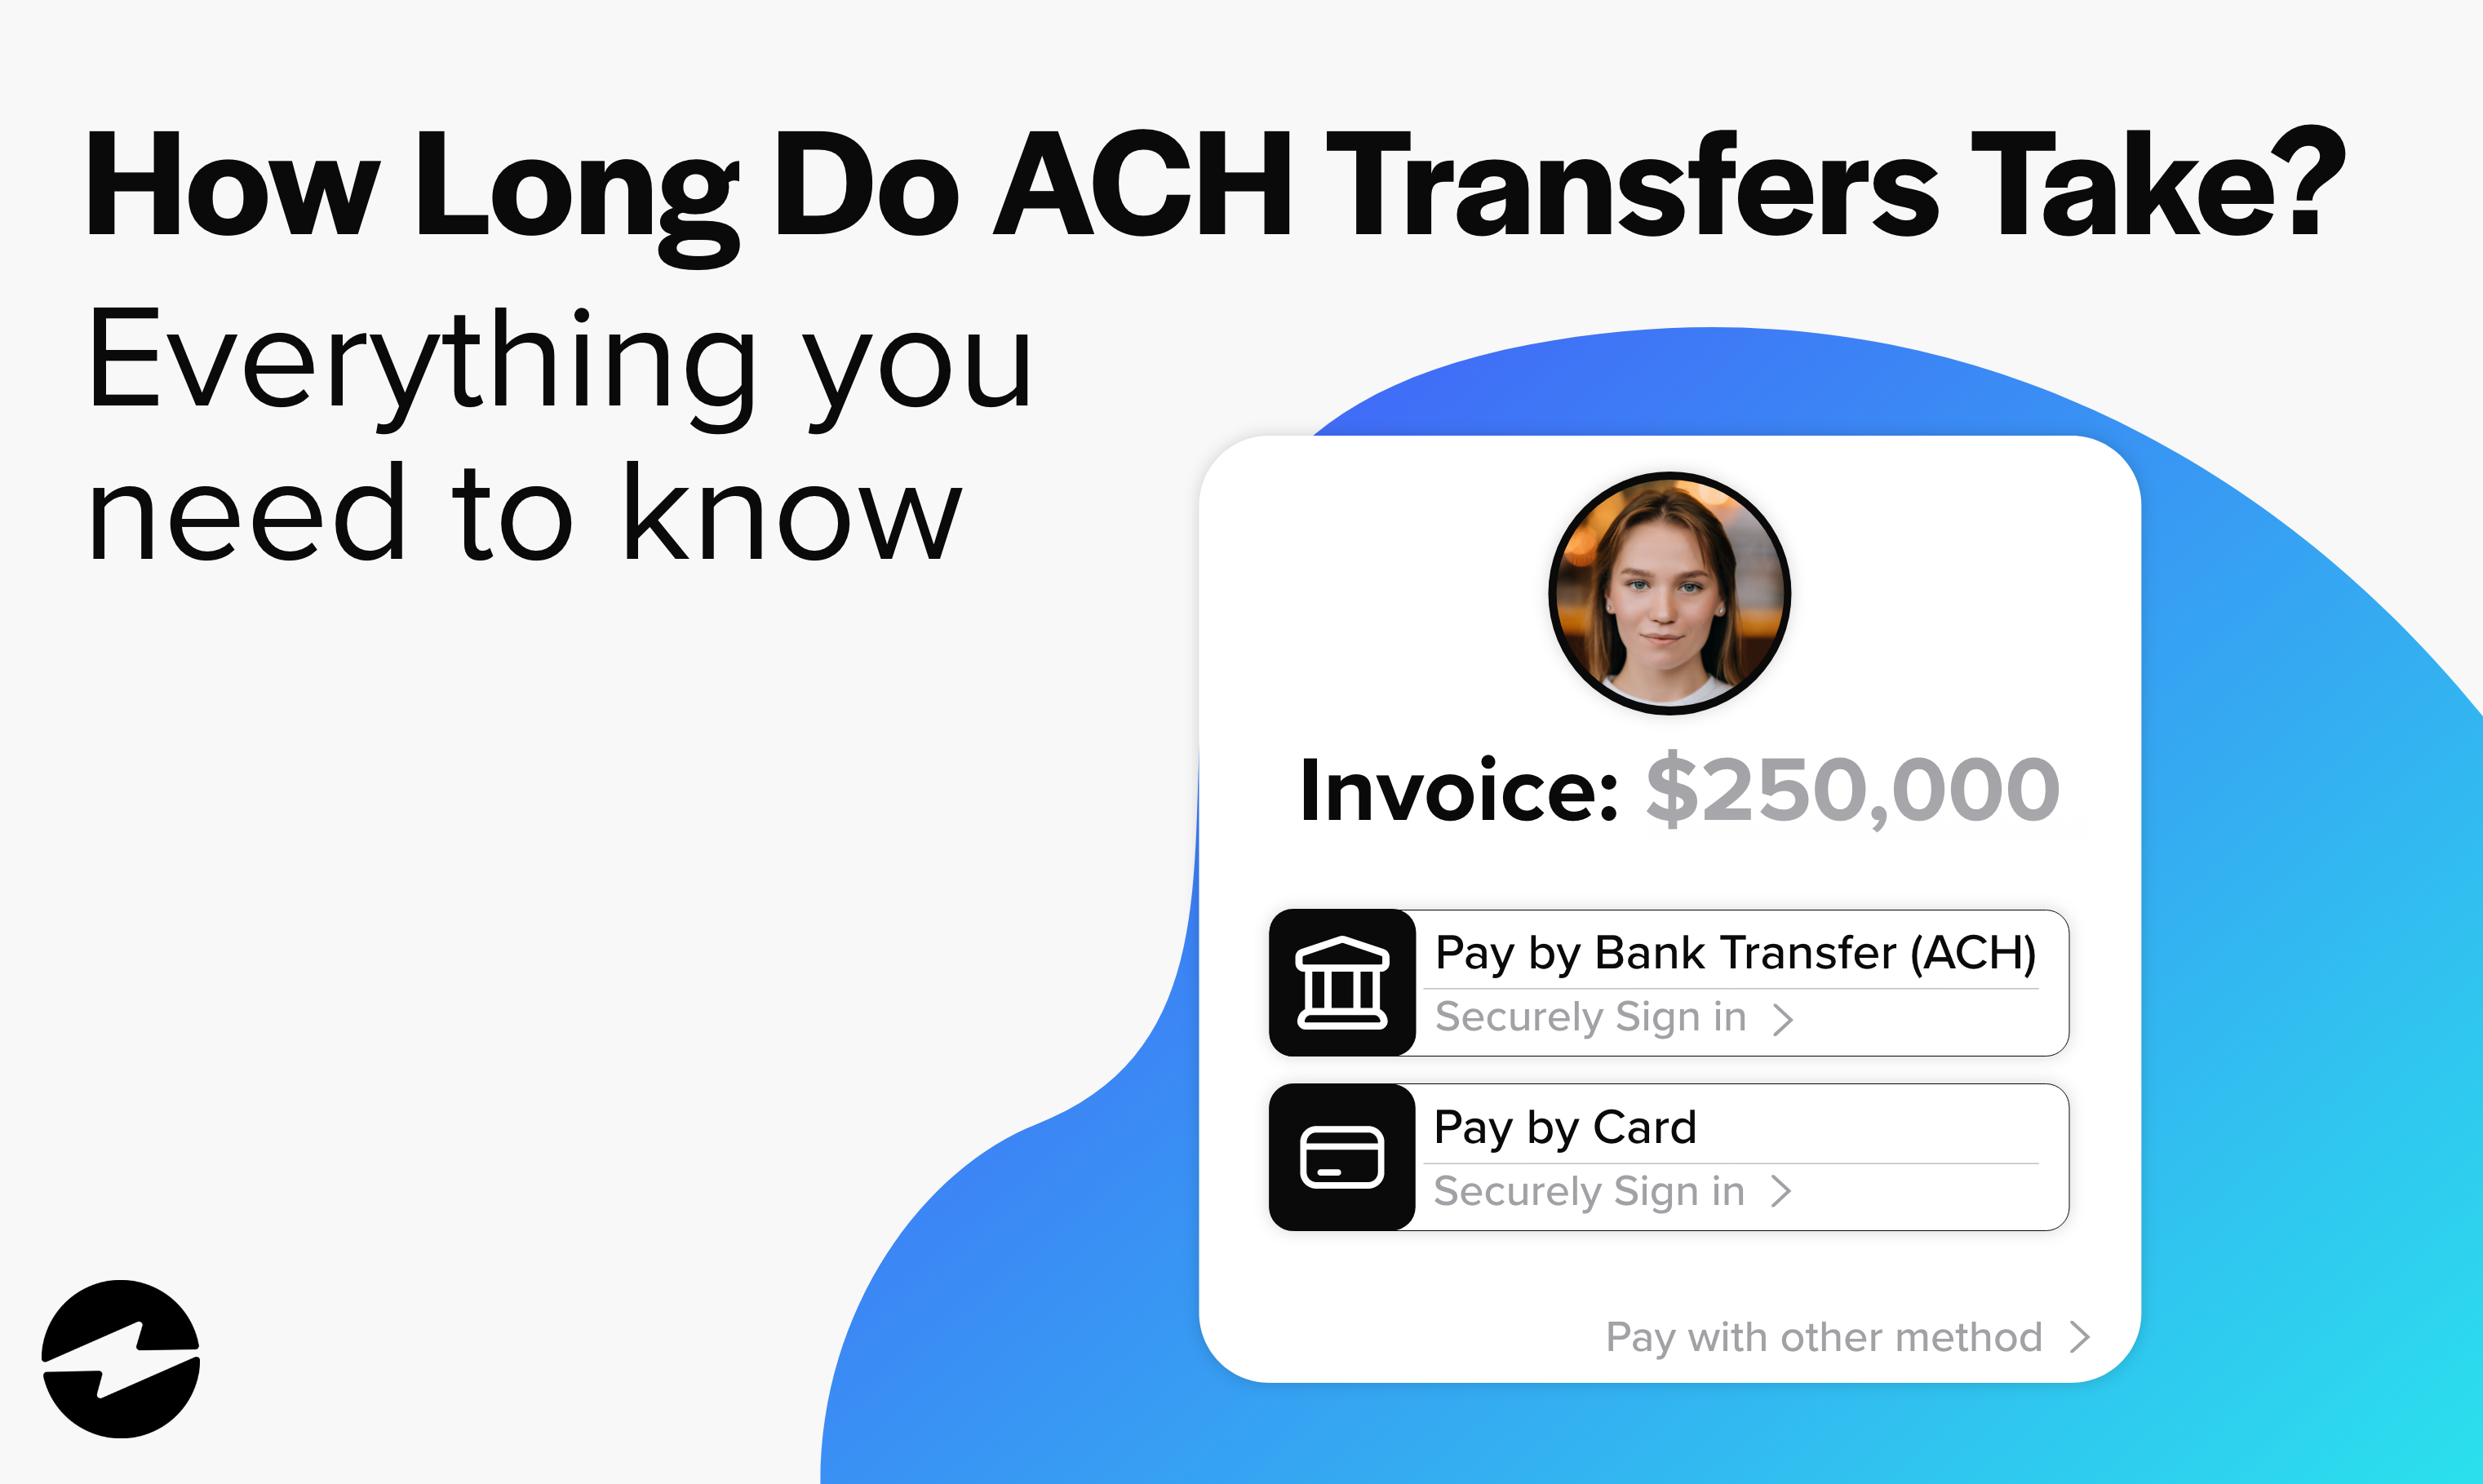 How Long does an ACH Transfer Take everything you need to know